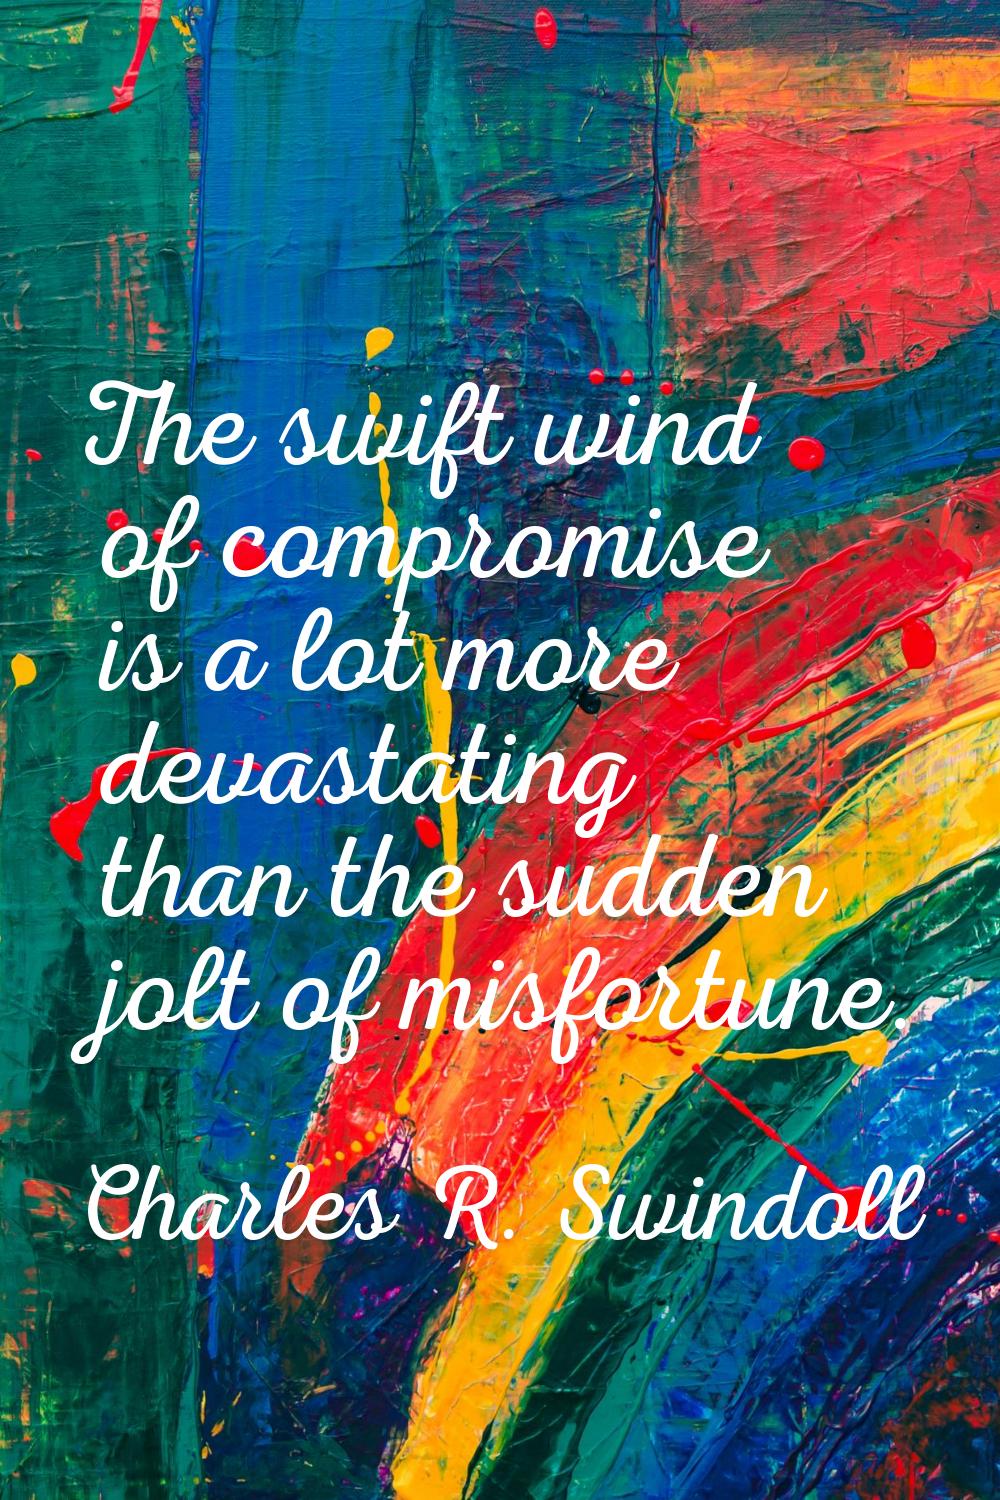 The swift wind of compromise is a lot more devastating than the sudden jolt of misfortune.